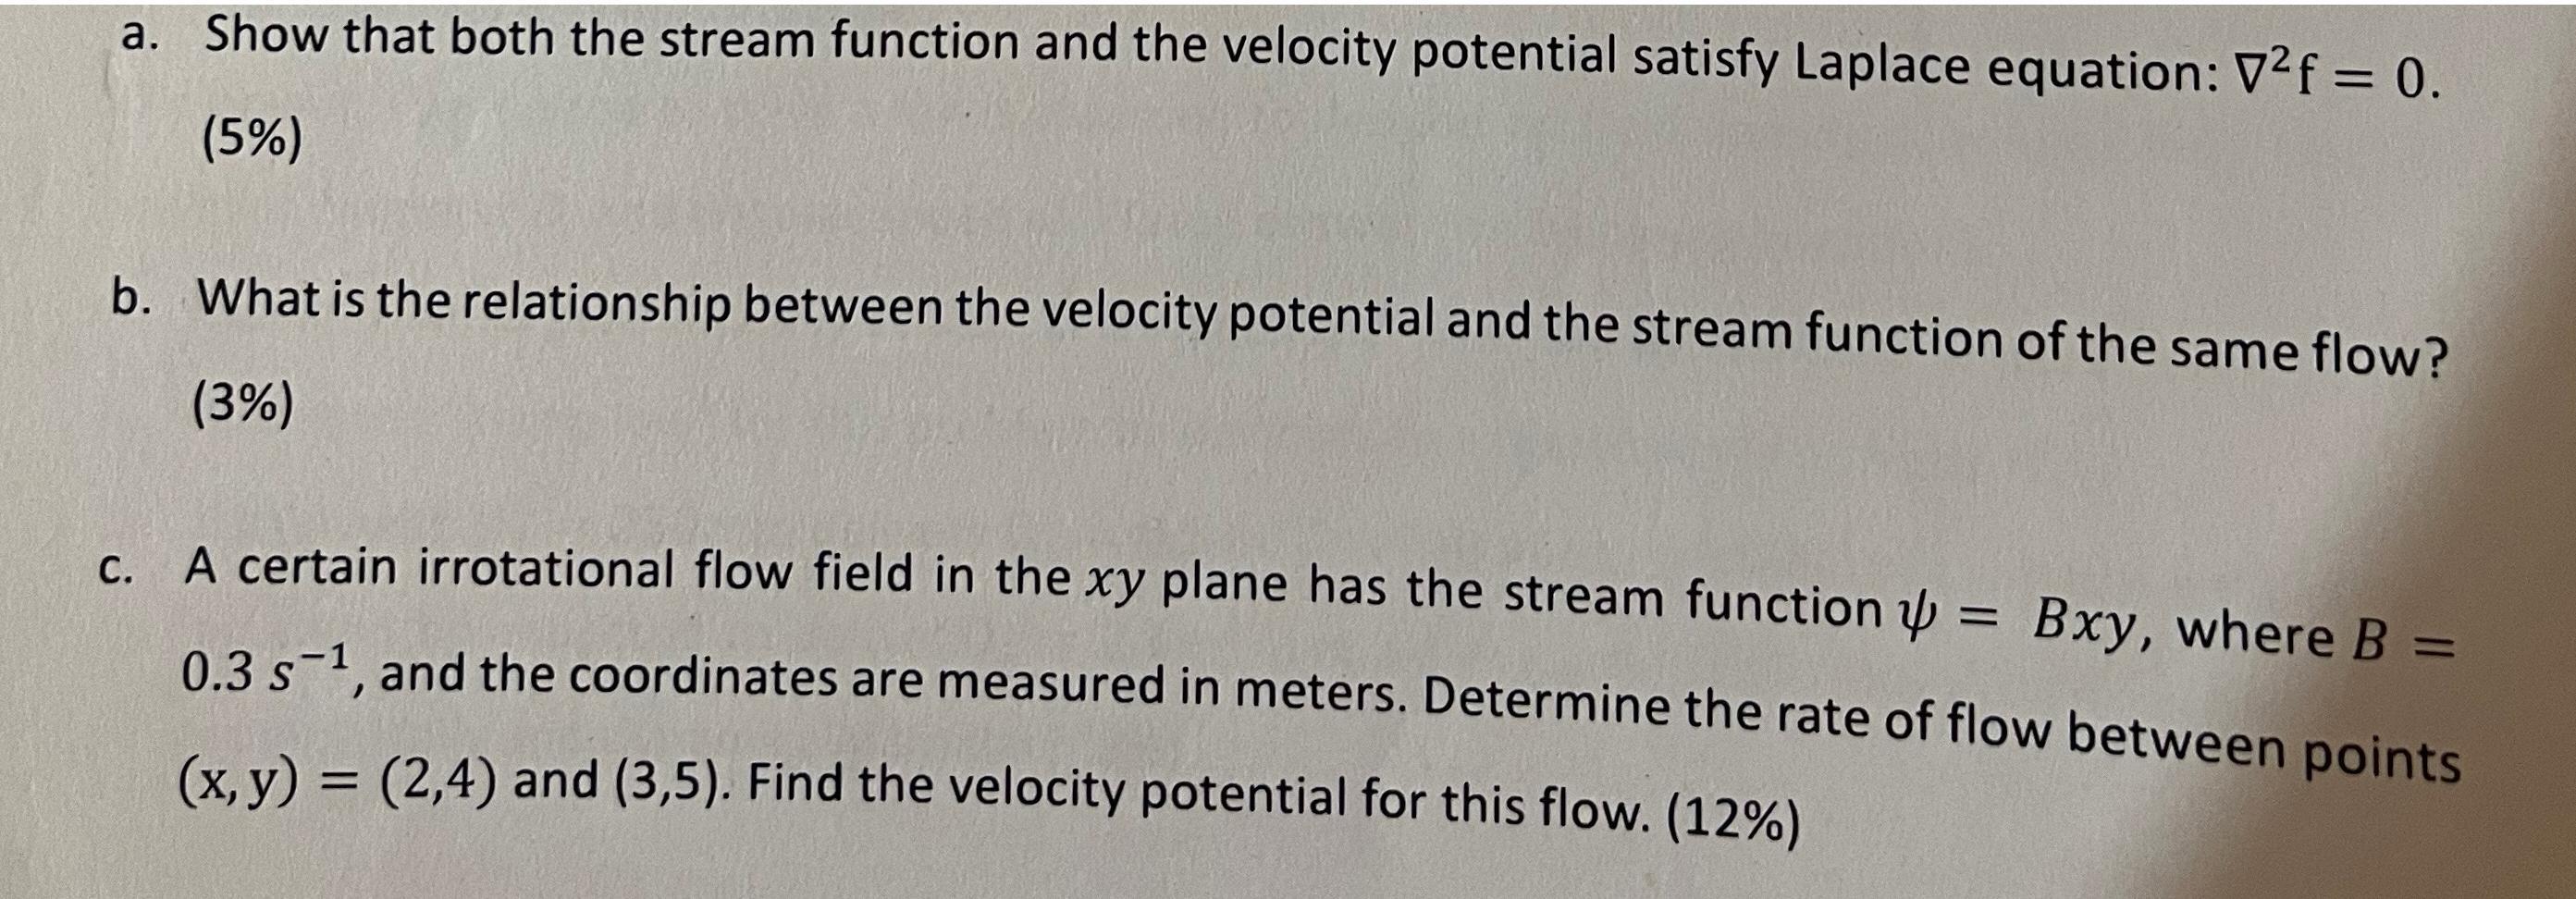 a. Show that both the stream function and the velocity potential satisfy Laplace equation: Vf = 0. (5%) b.